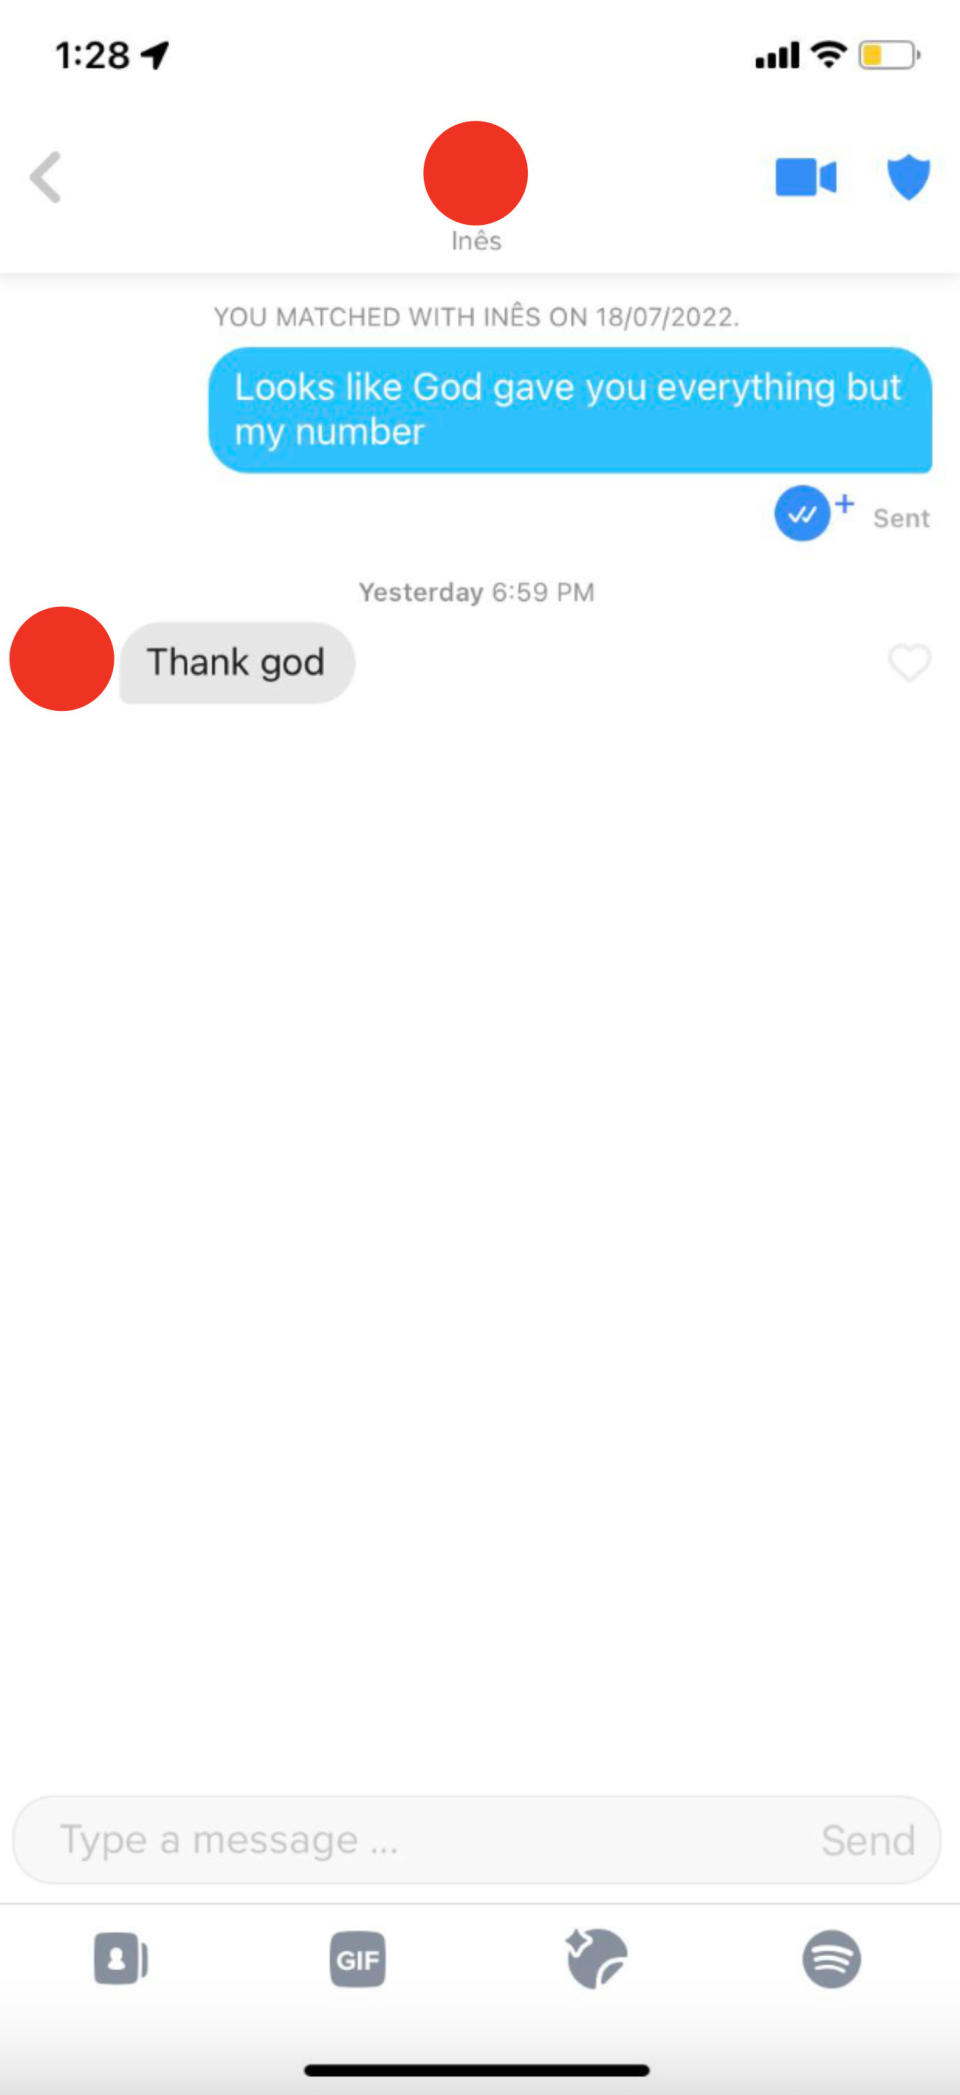 Message exchange ending in, "thank god"